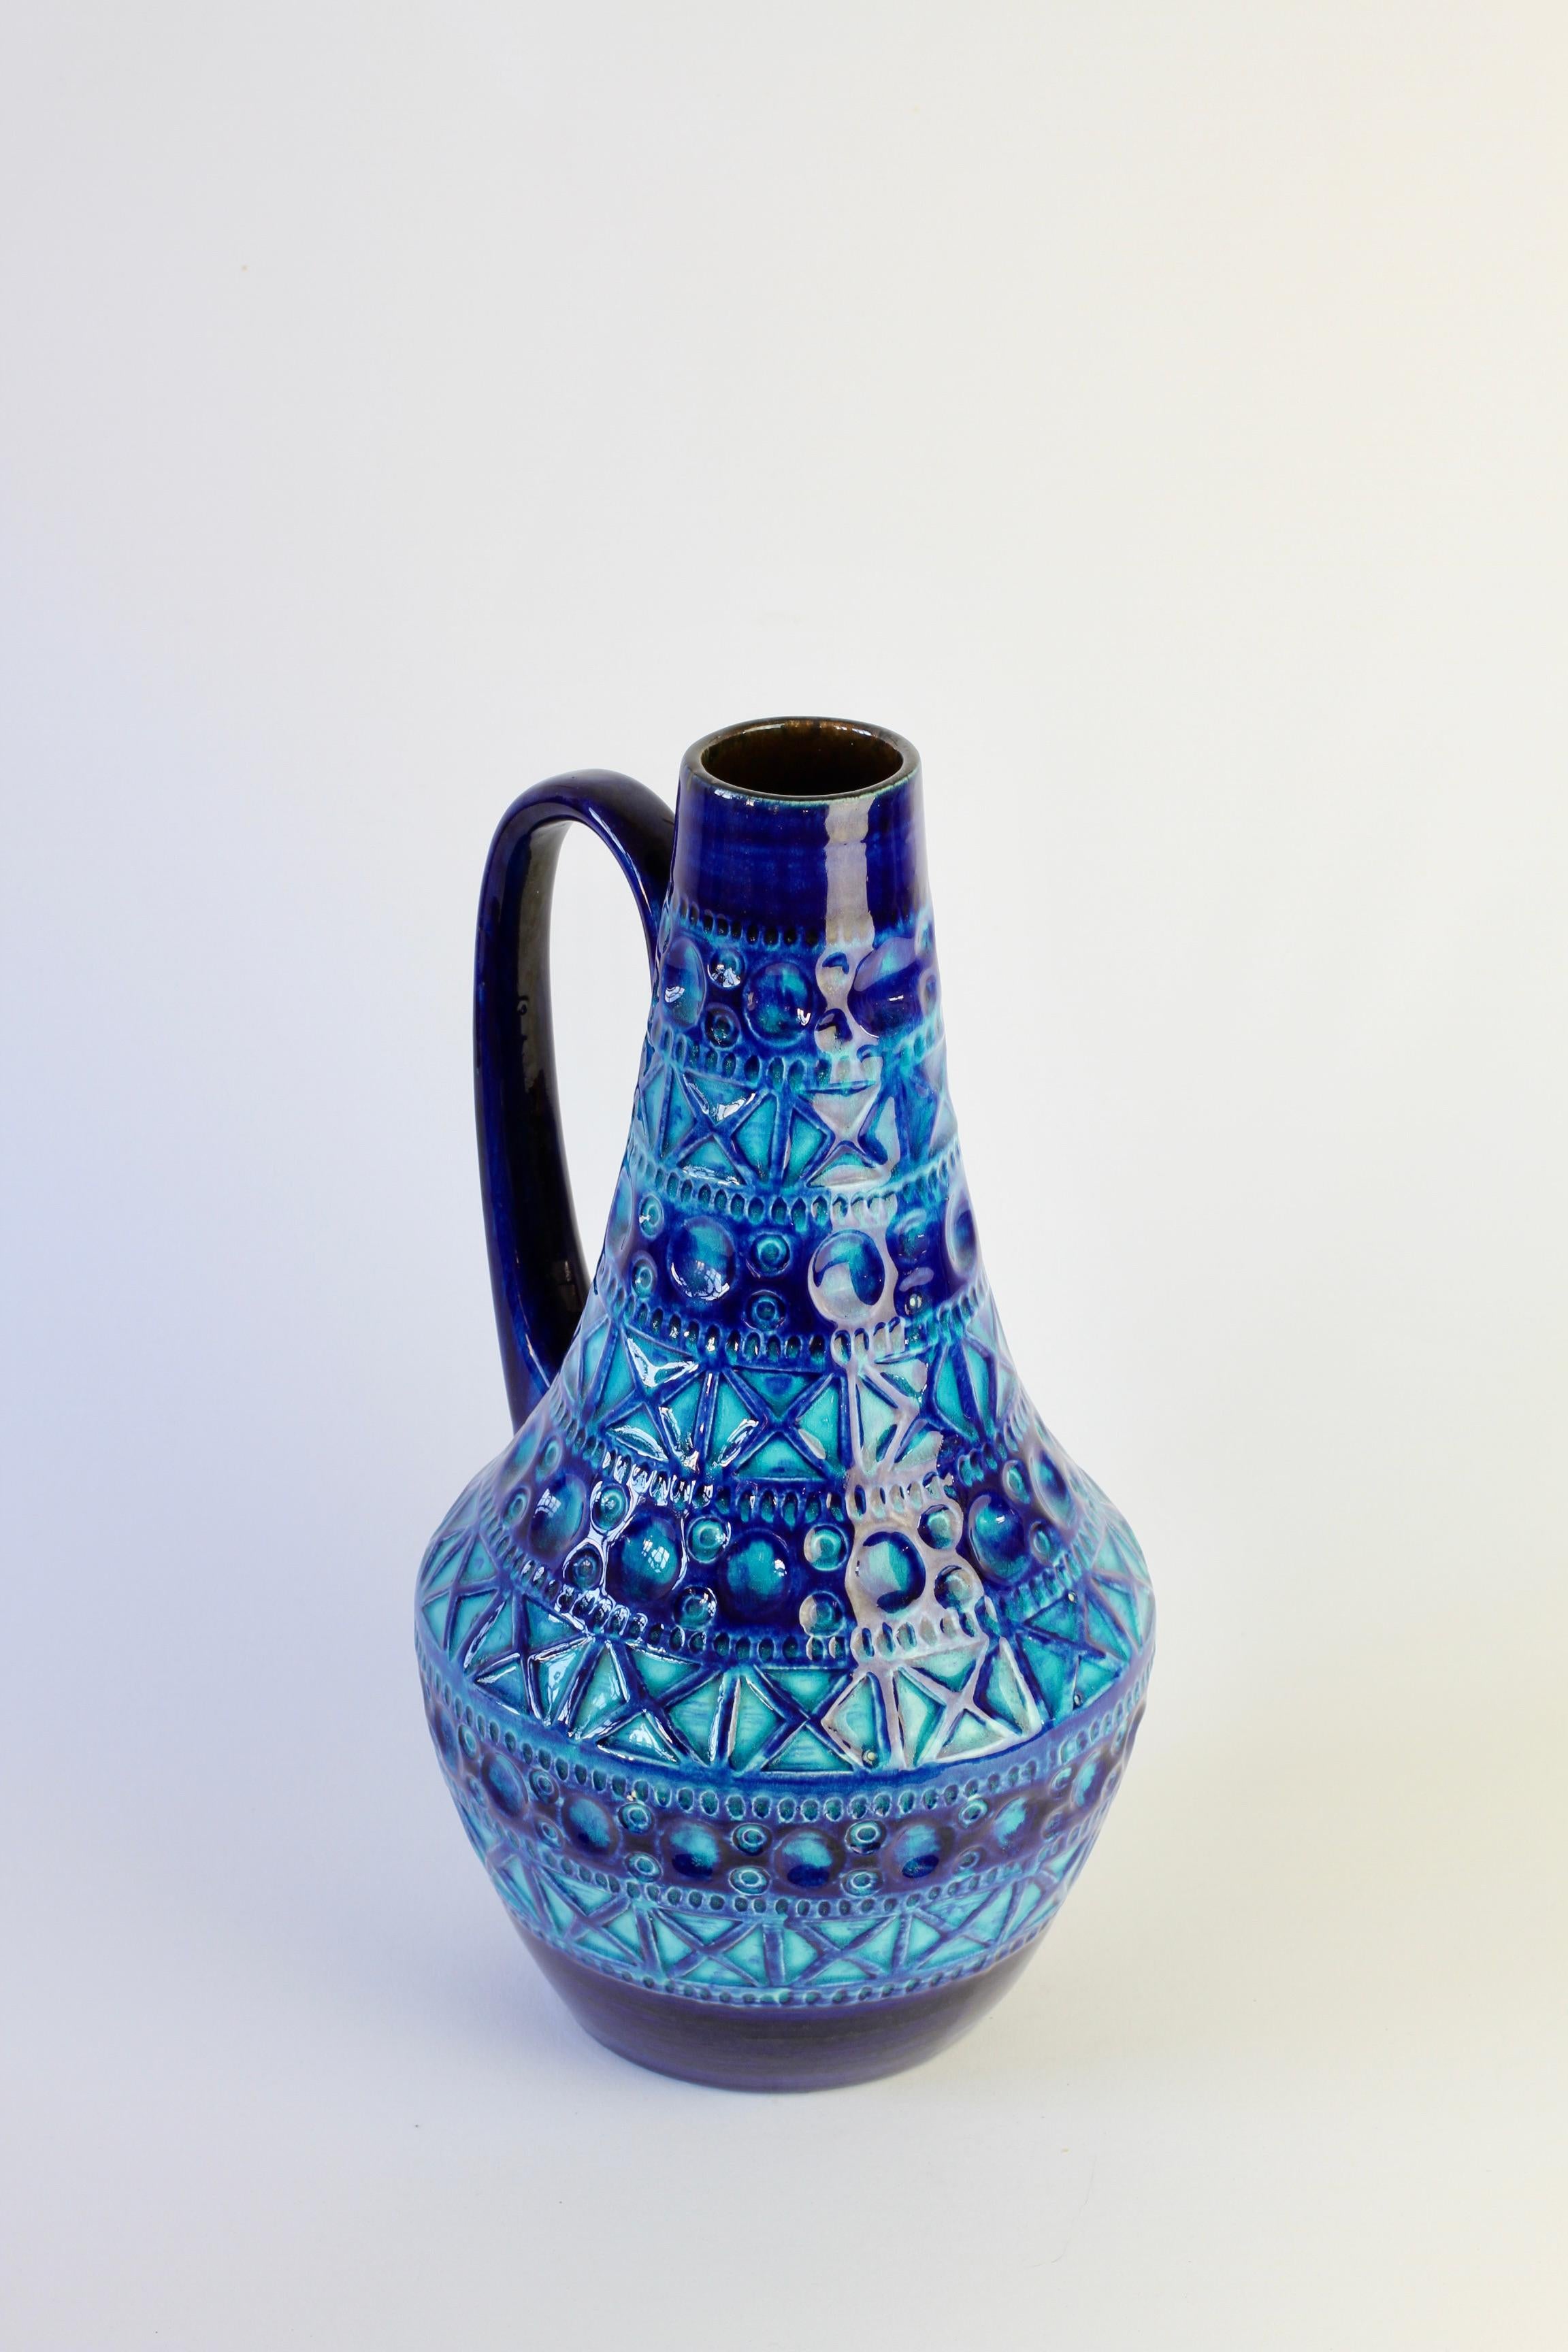 Vintage West German Bitossi Style Vase by Bodo Mans for Bay Pottery, circa 1970 For Sale 3